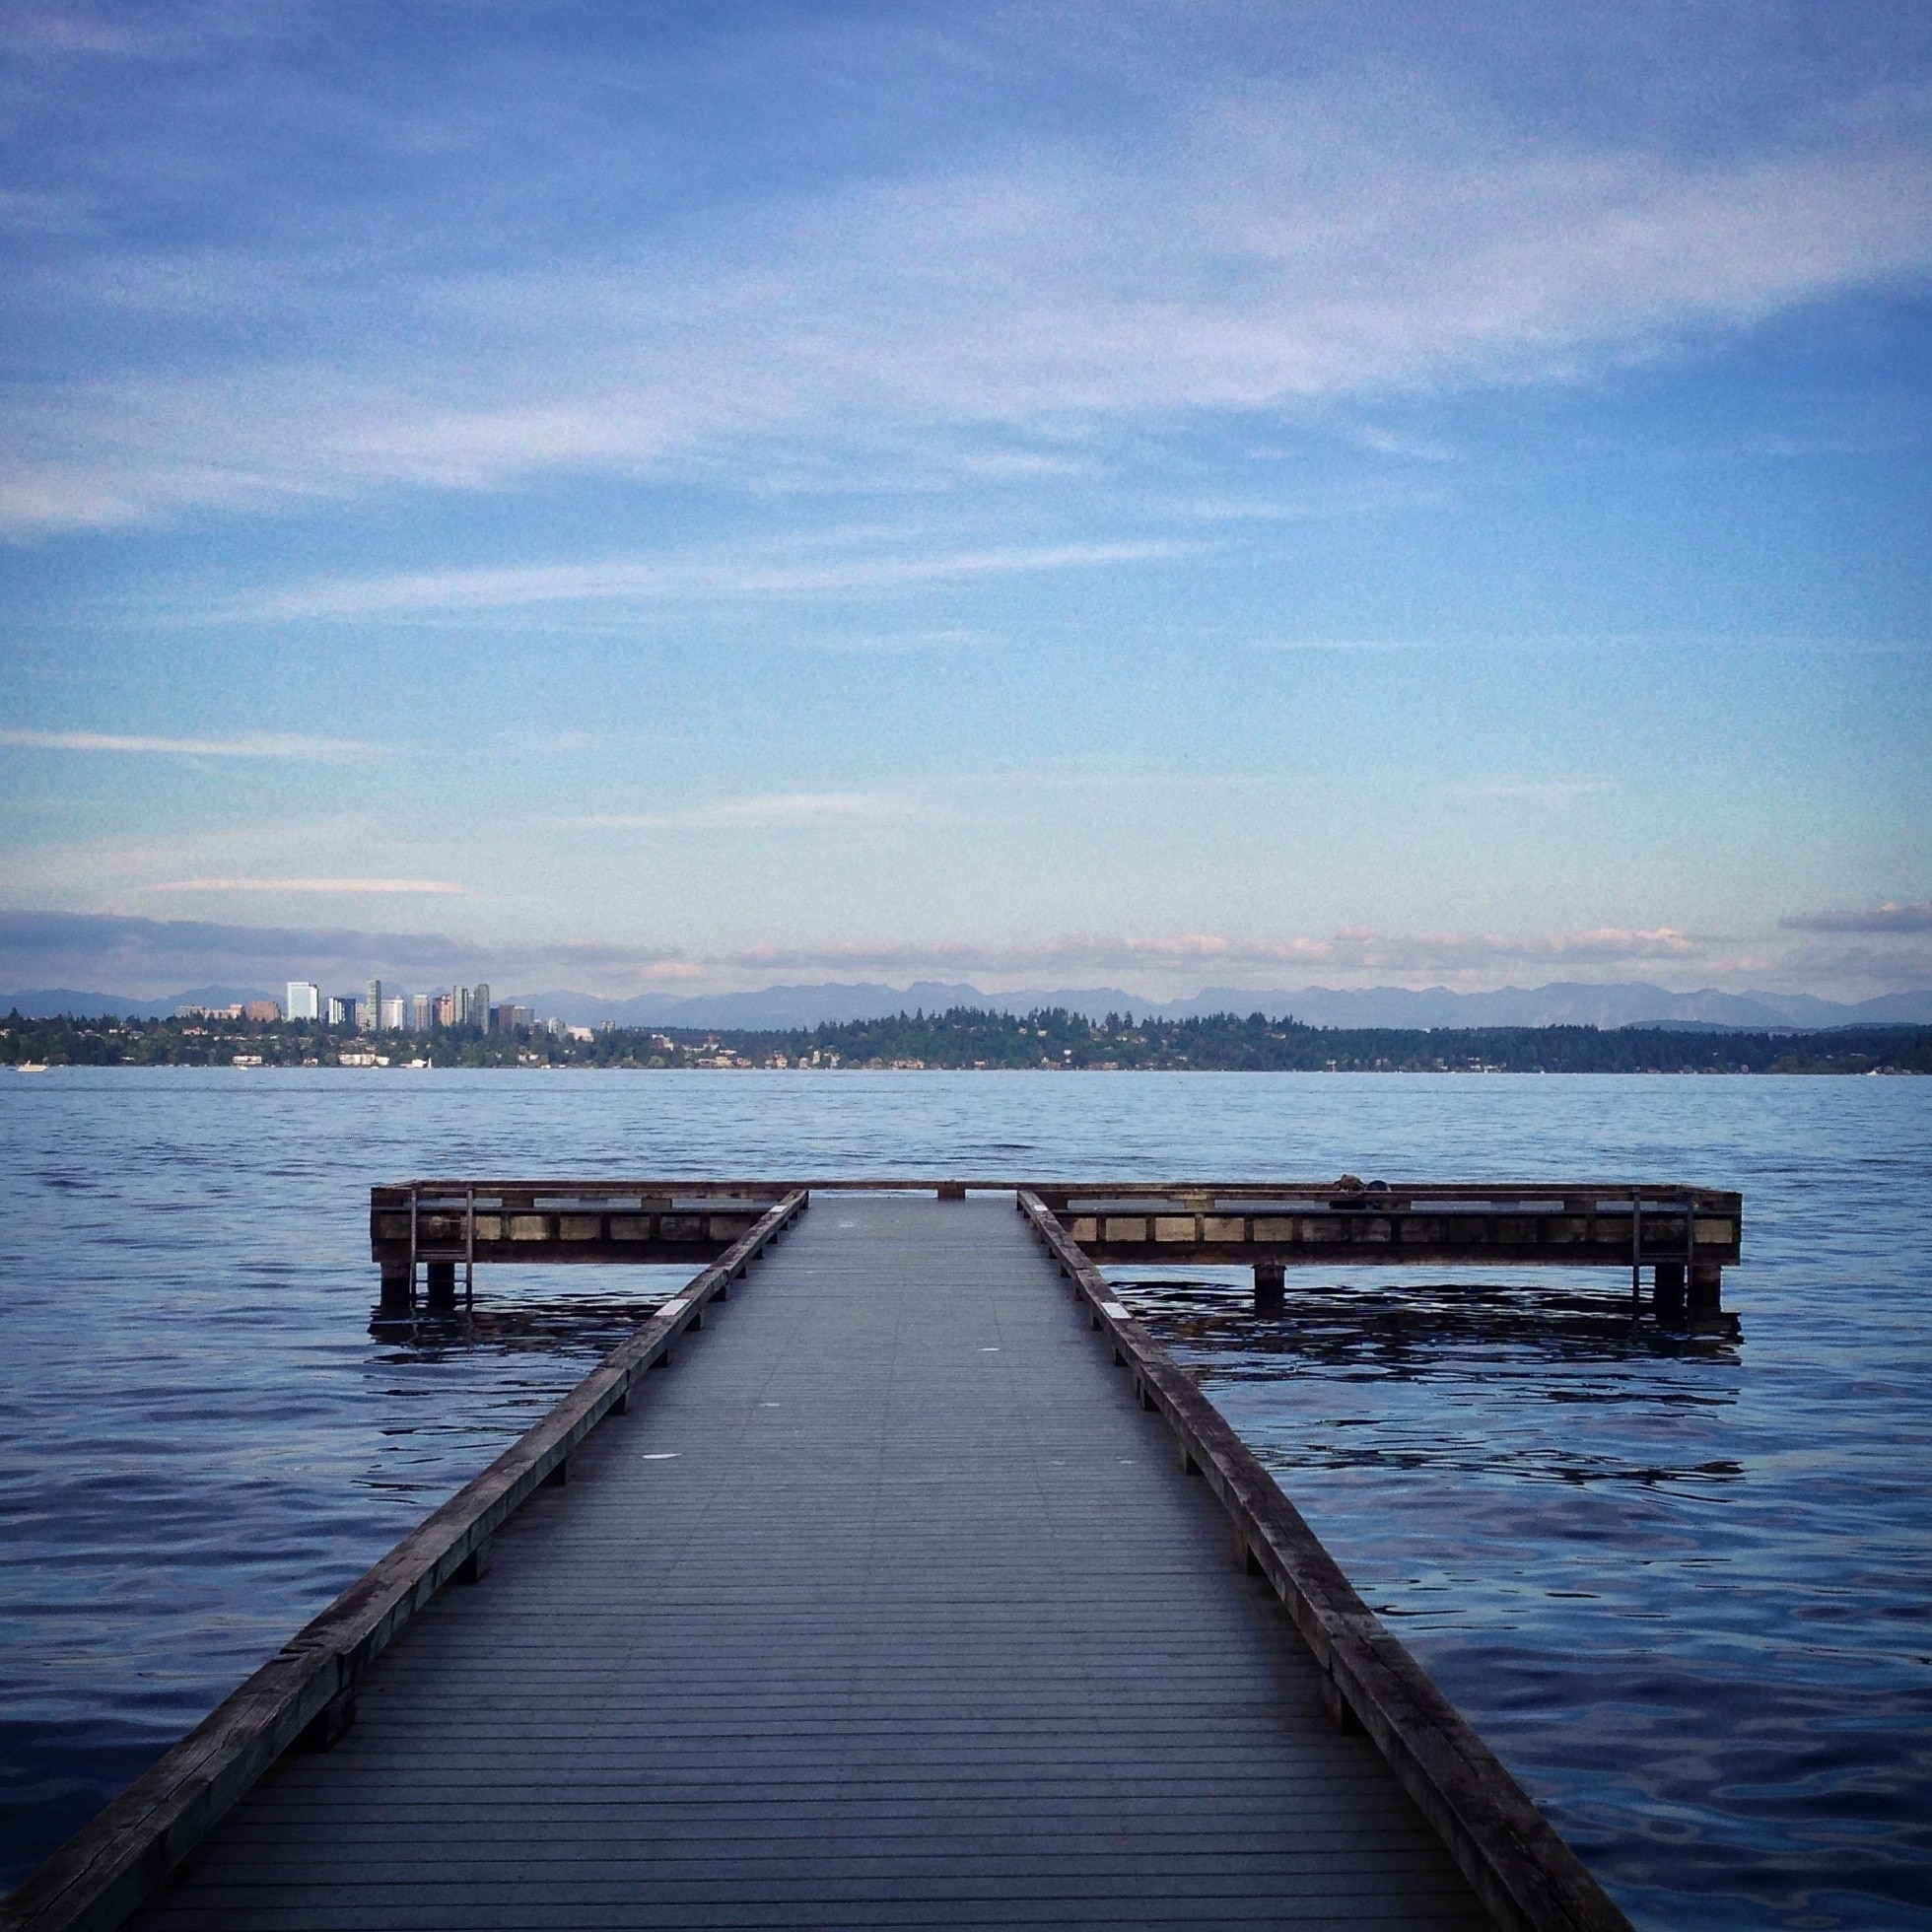 A short walk south of Madrona Beach is a spot affectionately known to Seattle locals as the "t-dock." A favorite spot for diving, sunbathing, skinny dipping and floating in the warmer months, this dock also provides awesome views of Lake Washington, Bellevue, and the Cascade Mountains. 